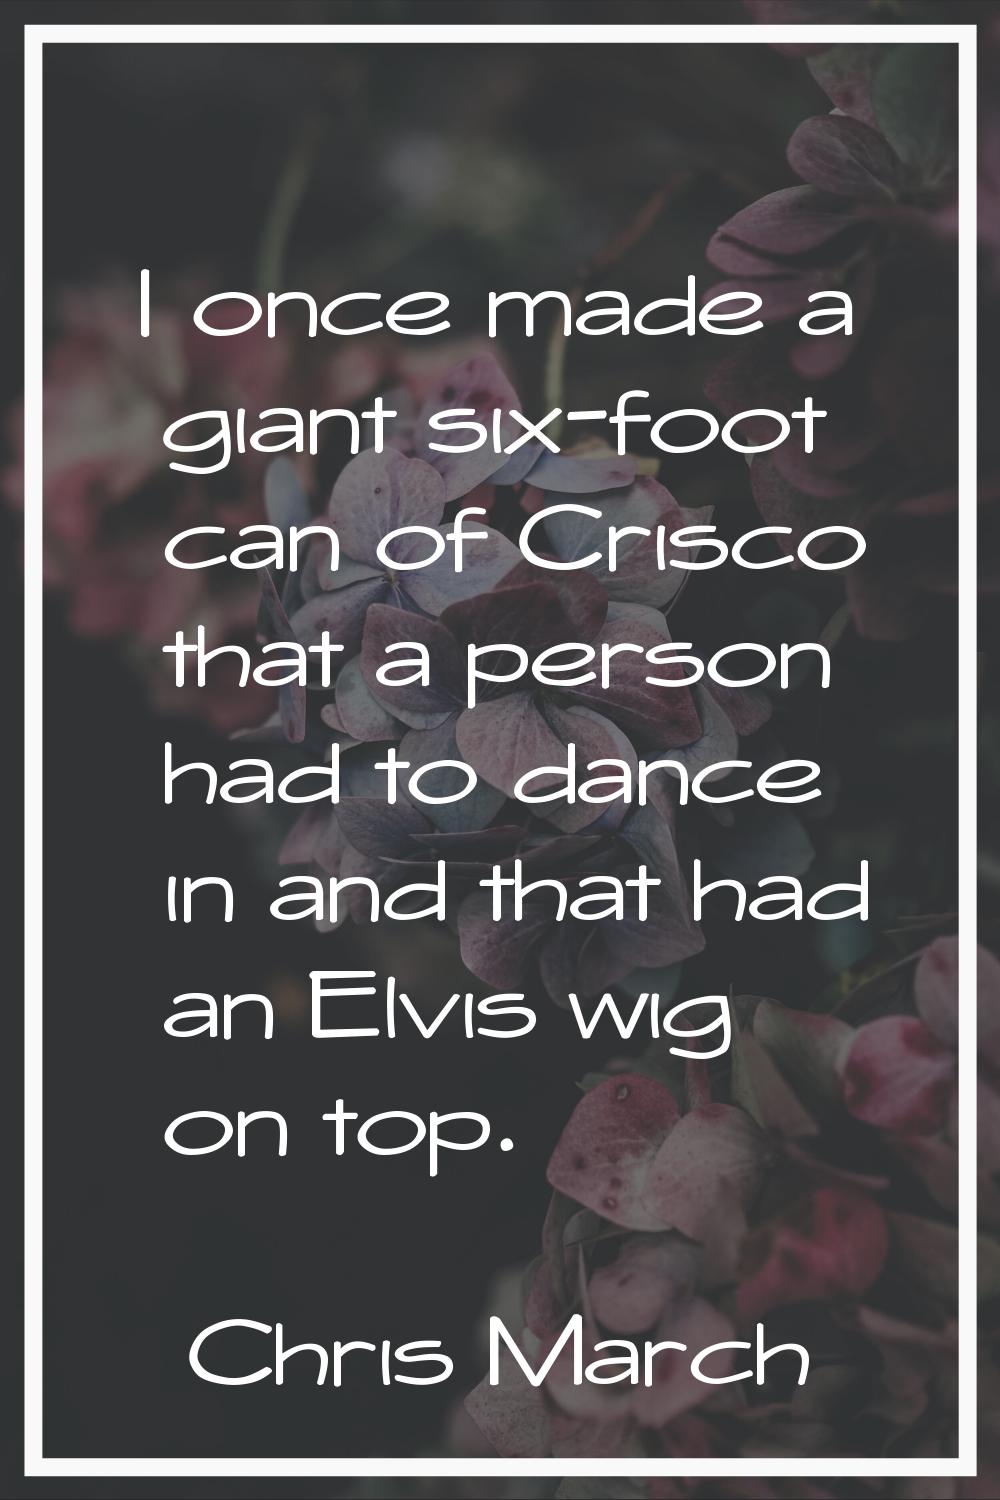 I once made a giant six-foot can of Crisco that a person had to dance in and that had an Elvis wig 